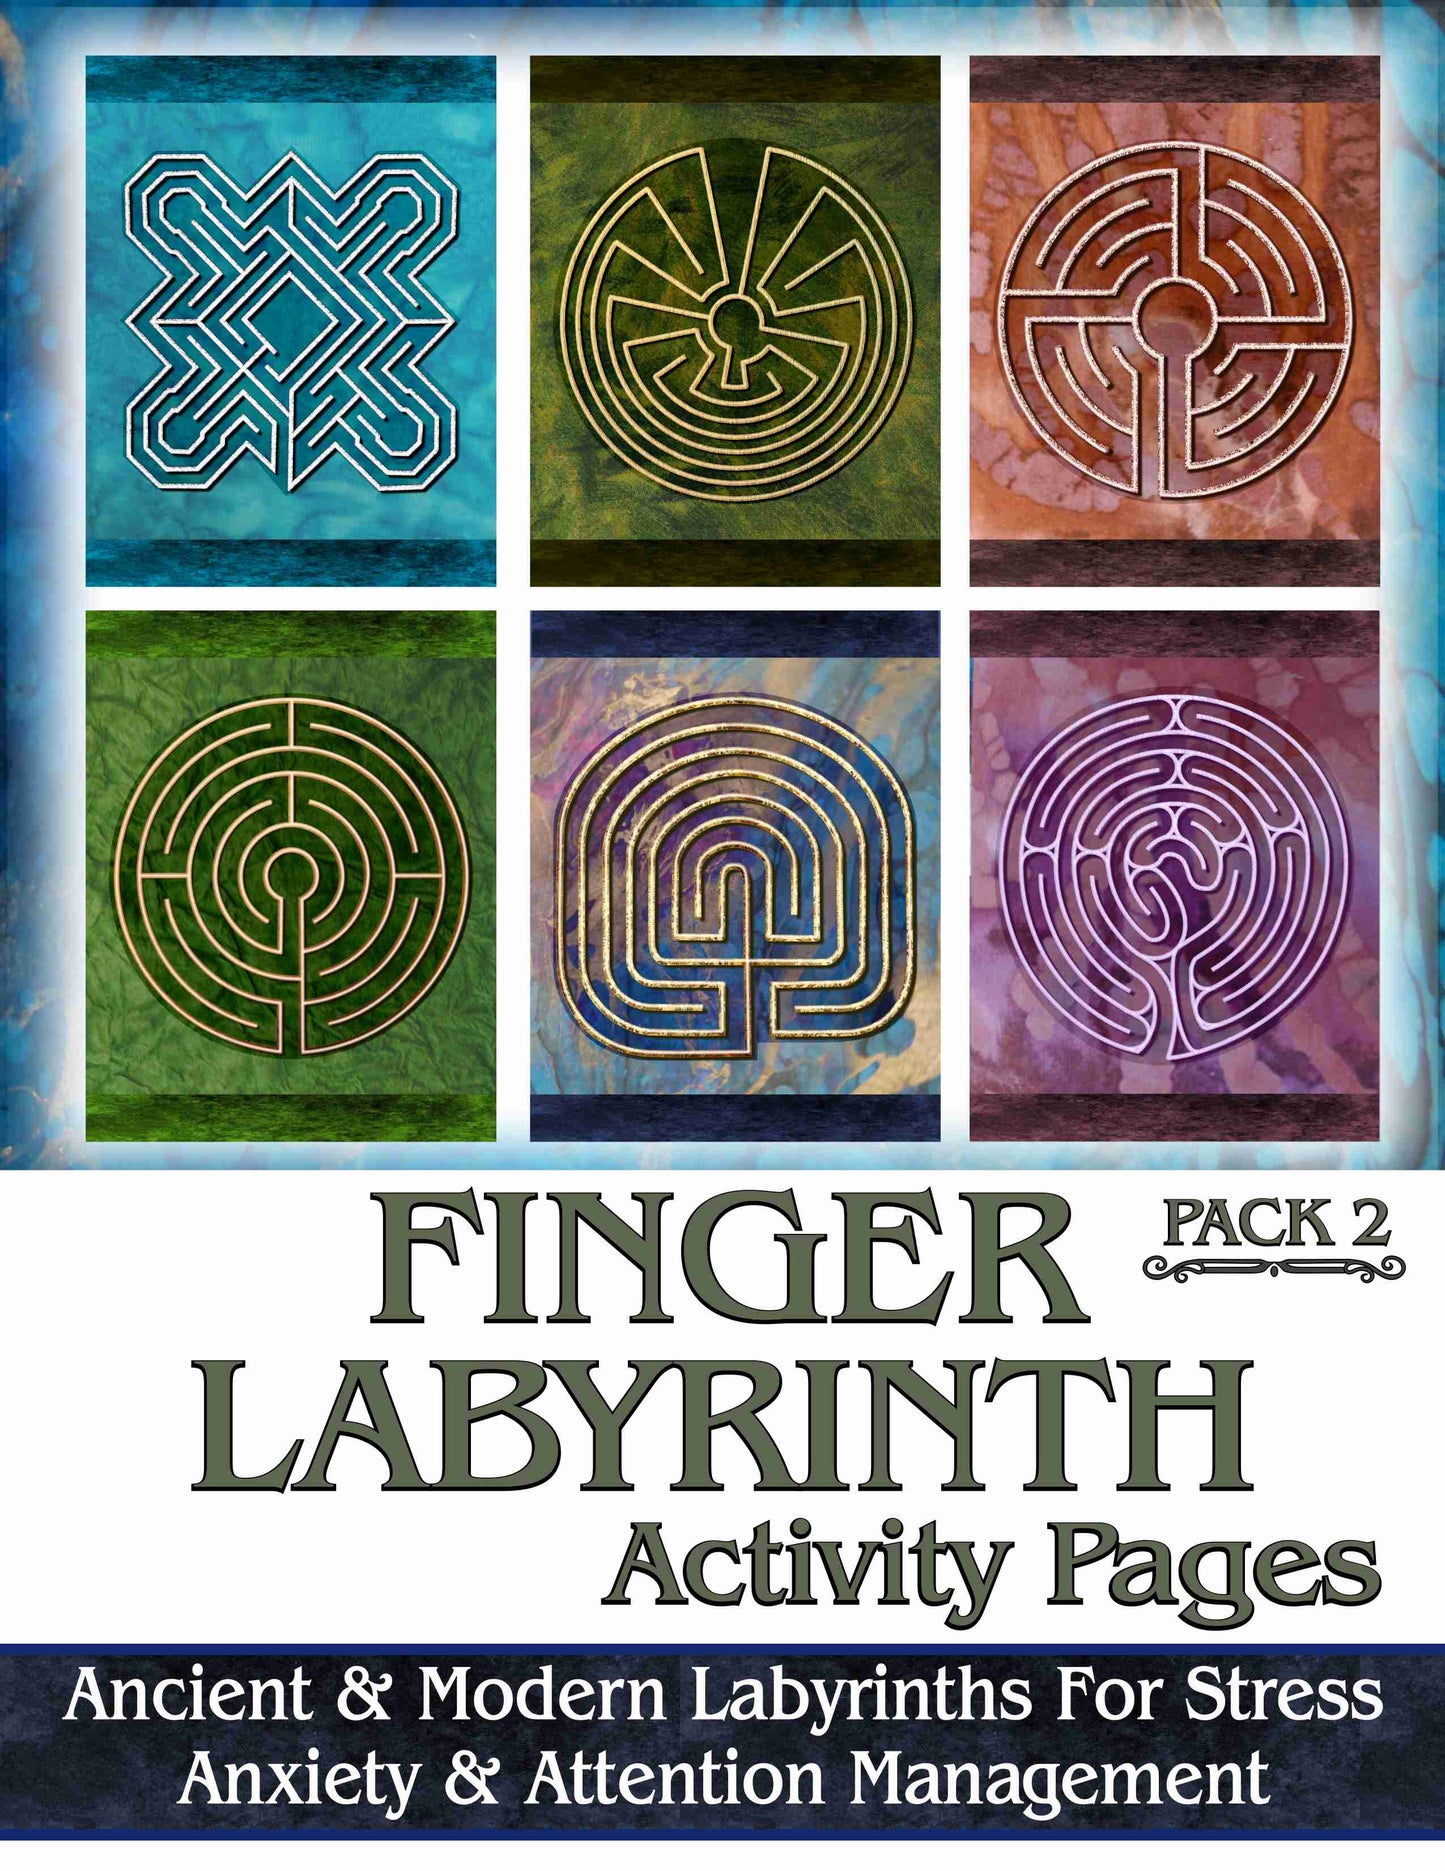 Finger Labyrinth Activity Pages Pack 2: Focus Tools for Stress, Anxiety & Attention Management